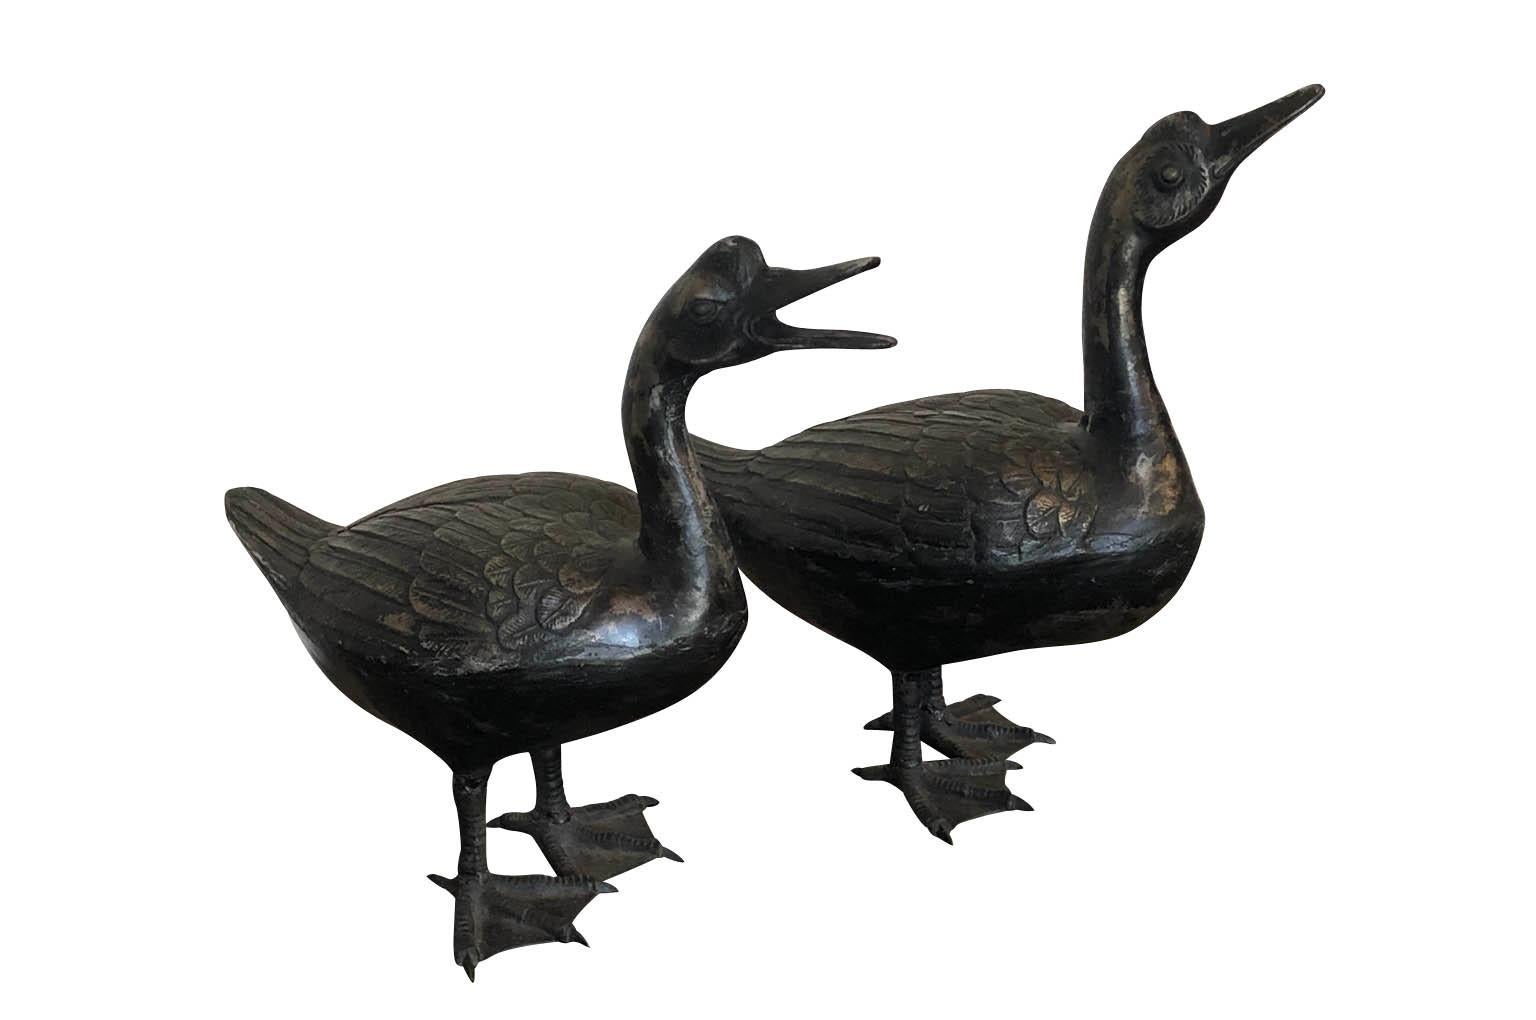 A delightful pair of later 19th century Canards - Ducks from the Provence region of France. Wonderfully crafted from painted cast iron. A very charming accent for any interior or garden. One canard measures 14 1/8